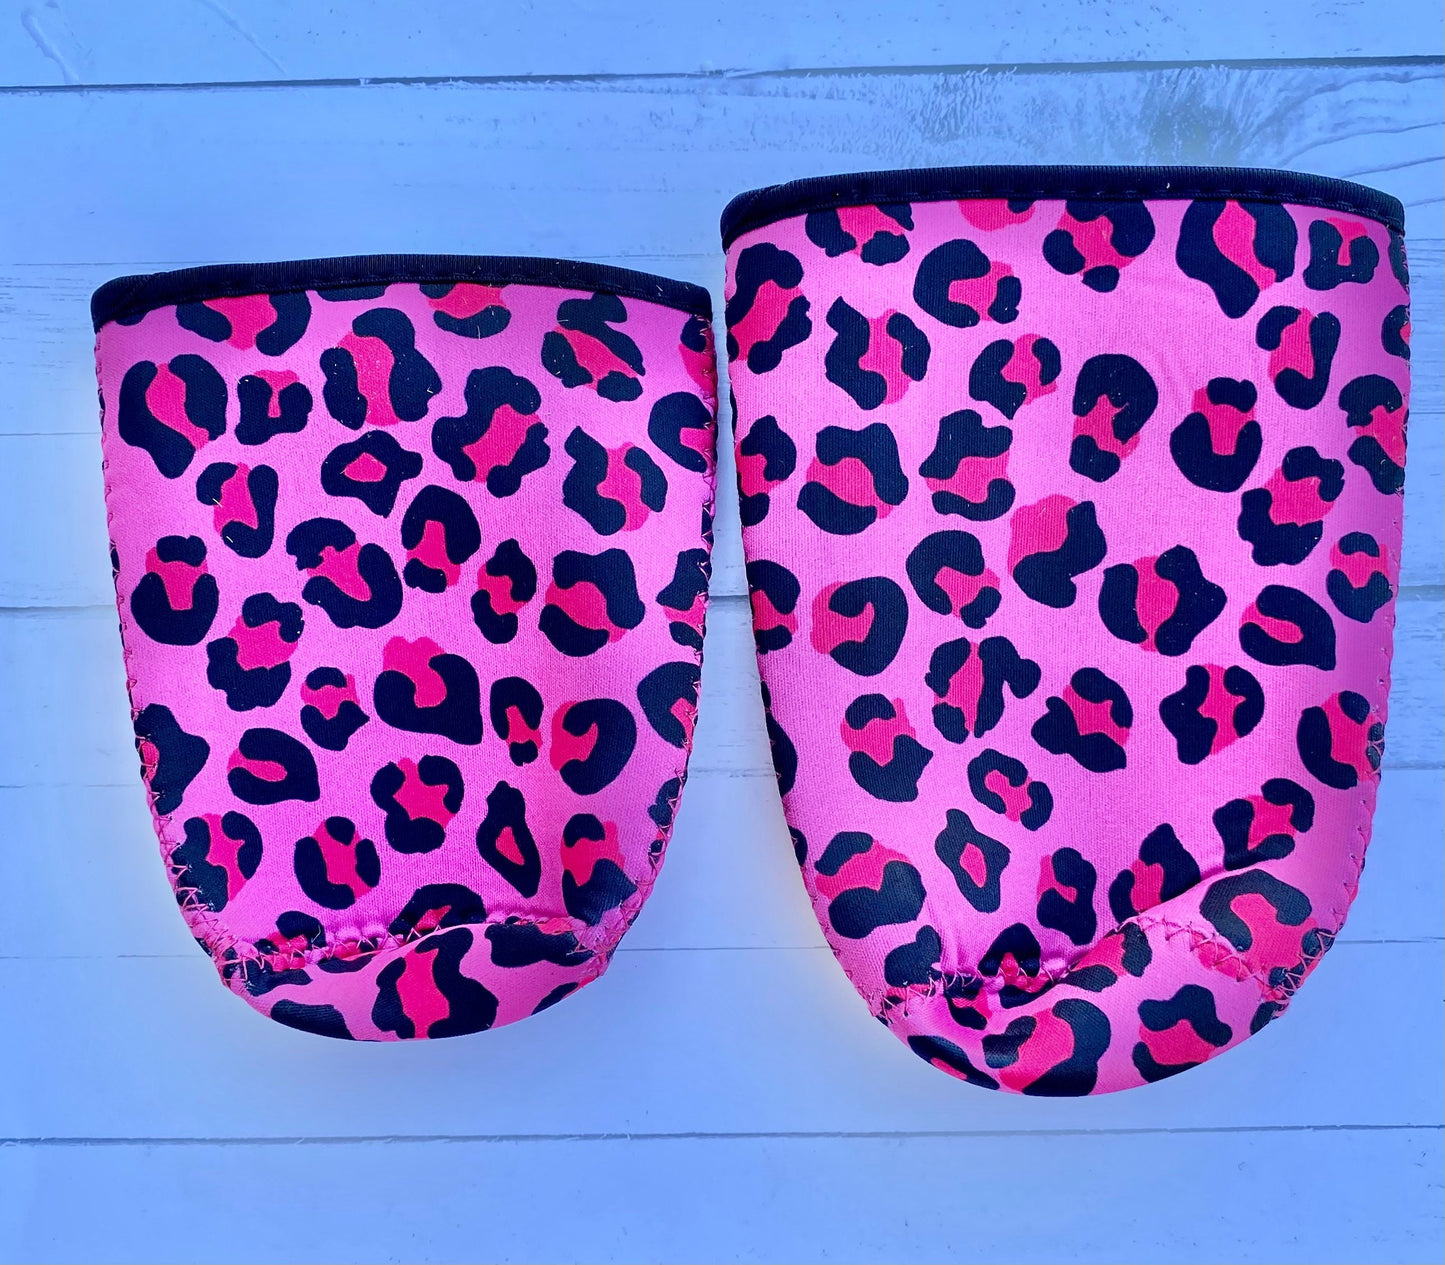 Iced Coffee cup coozie - Reusable, durable sleeve - Pink Leopard Print